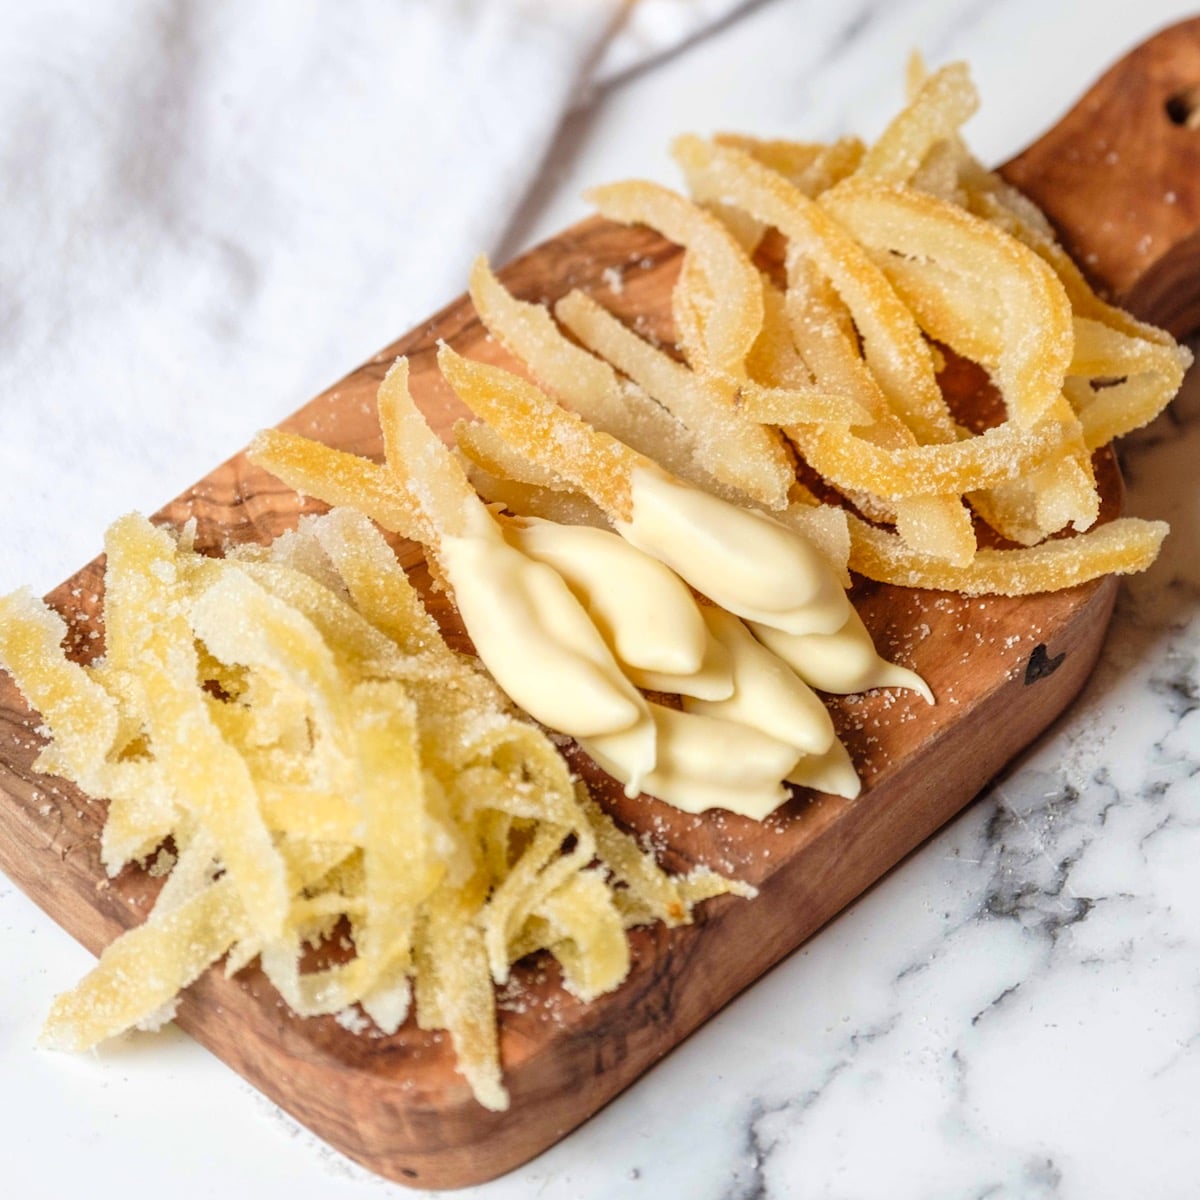 Featured square shot - wide shot of candied lemon peels on a small wood cutting board on marble counter. Large peels, small peels, peels dipped in white chocolate. White linen towel in background.